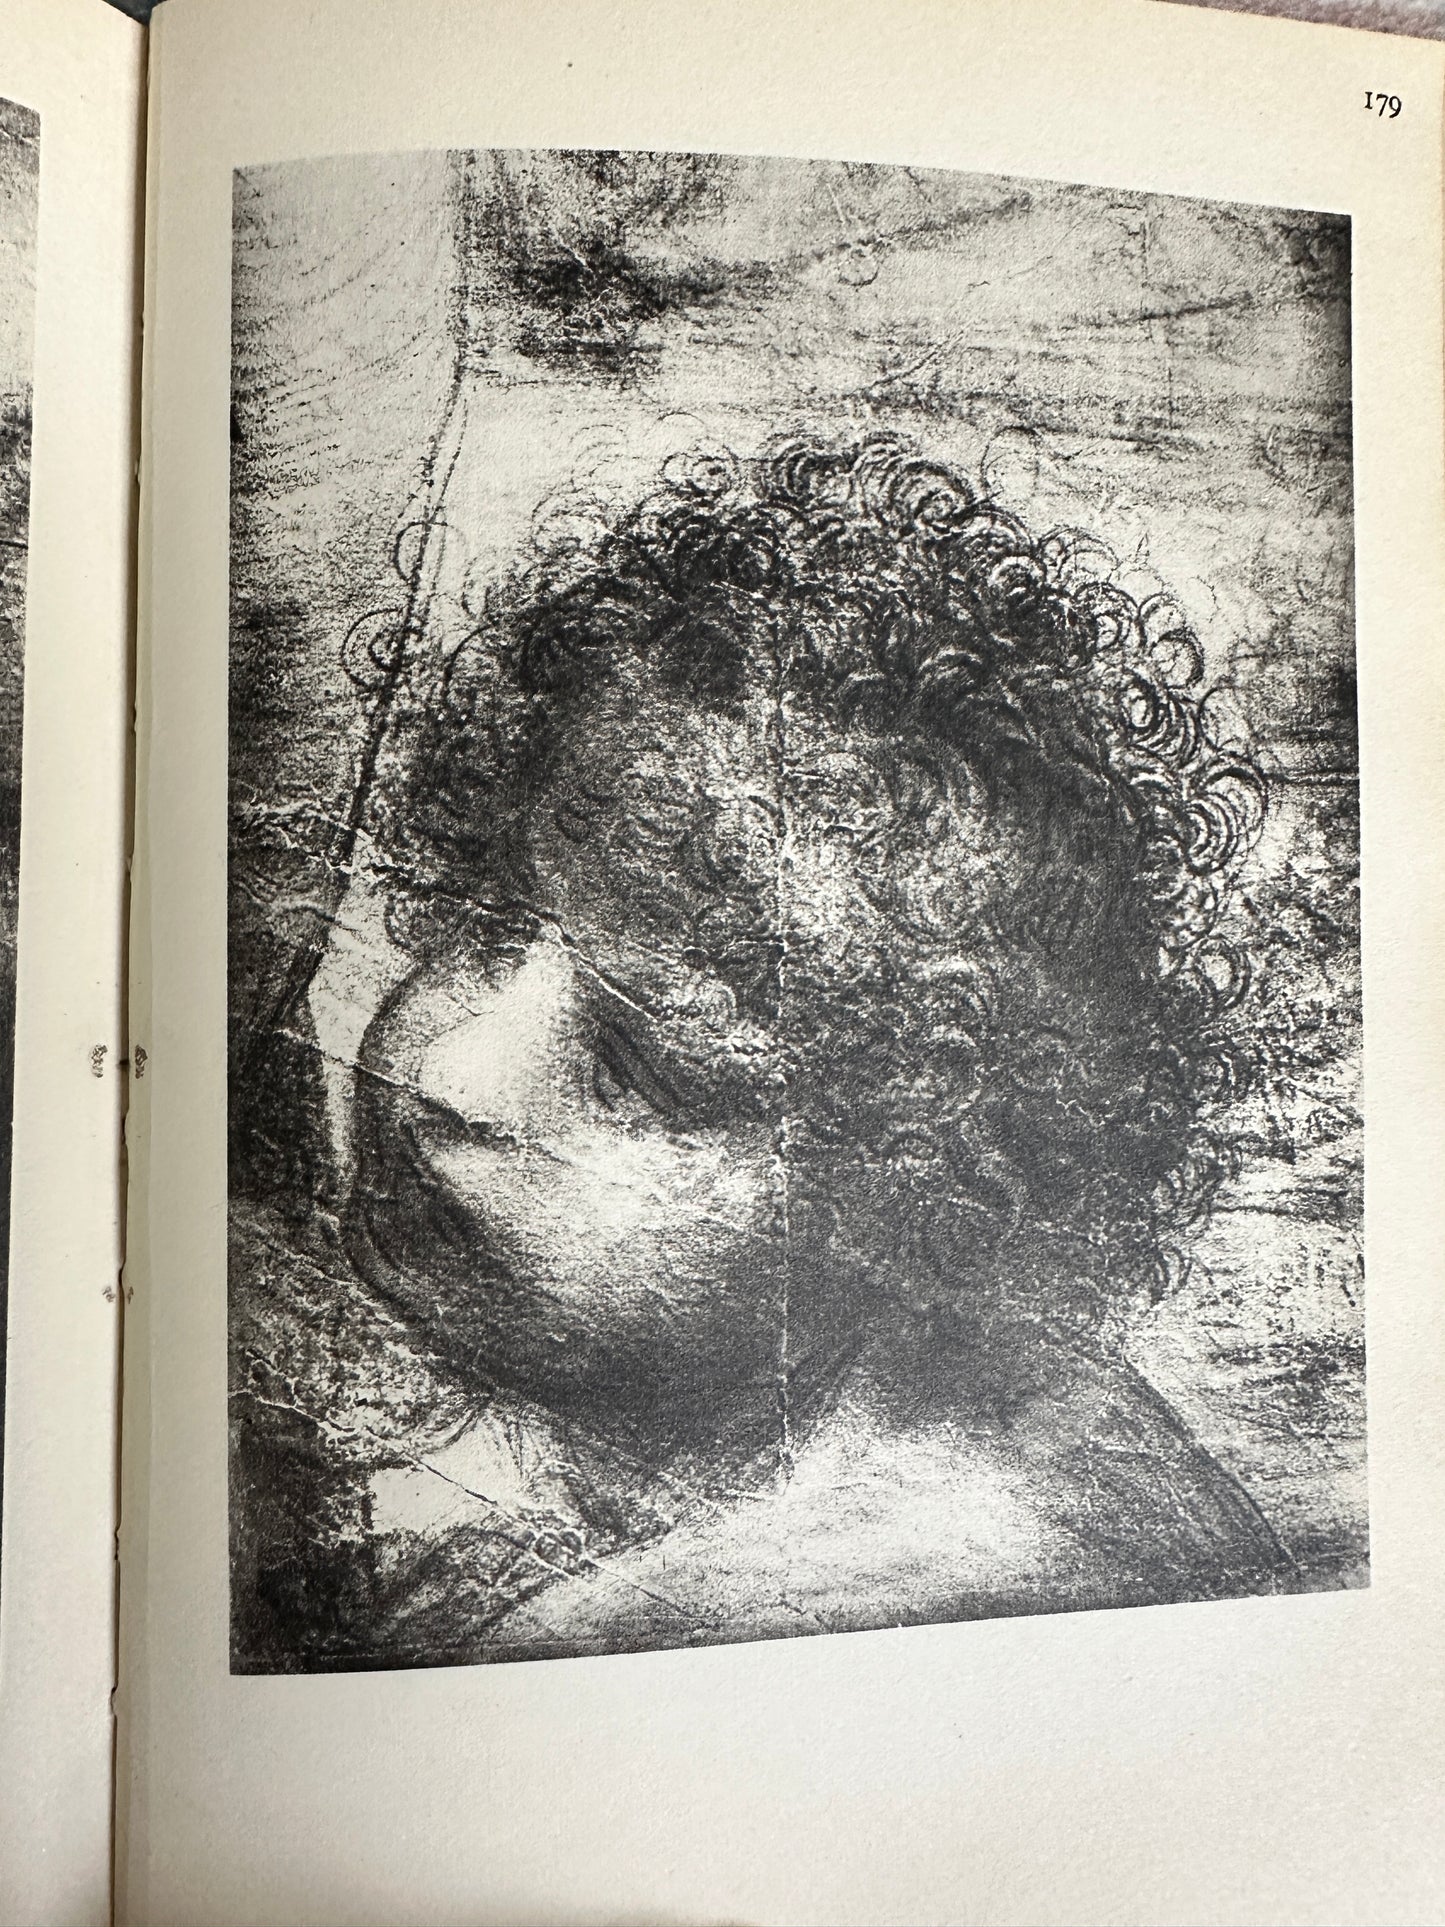 1952*1st* The Drawings Of Leonardo Da Vinci (Compiled & Translated by A. E. Popham(The Reprint Society)